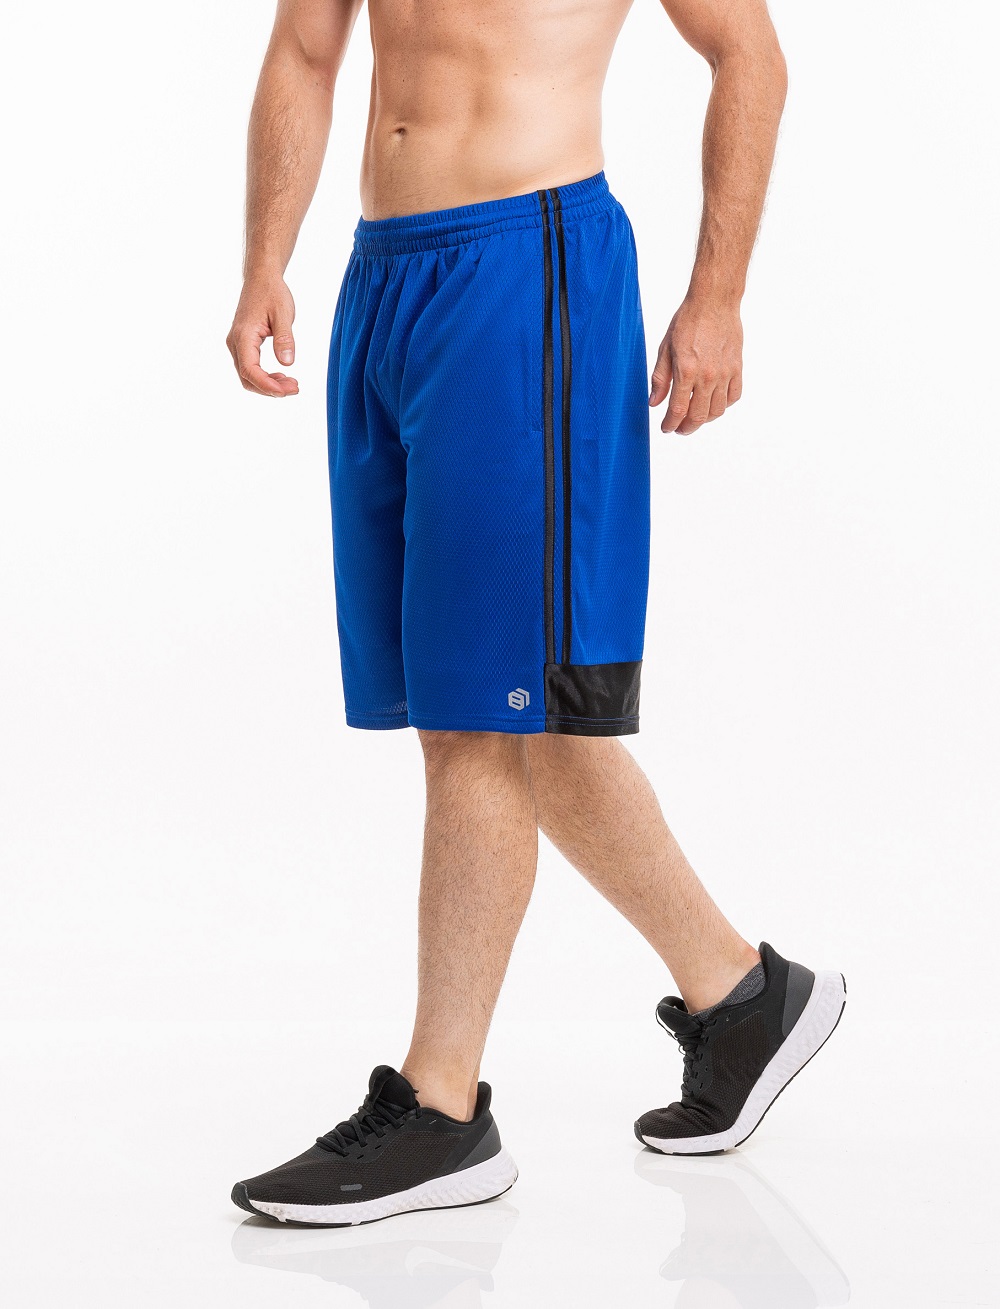 Men's Premium Active Athletic Performance Shorts with Pockets - 5 Pack - image 3 of 7